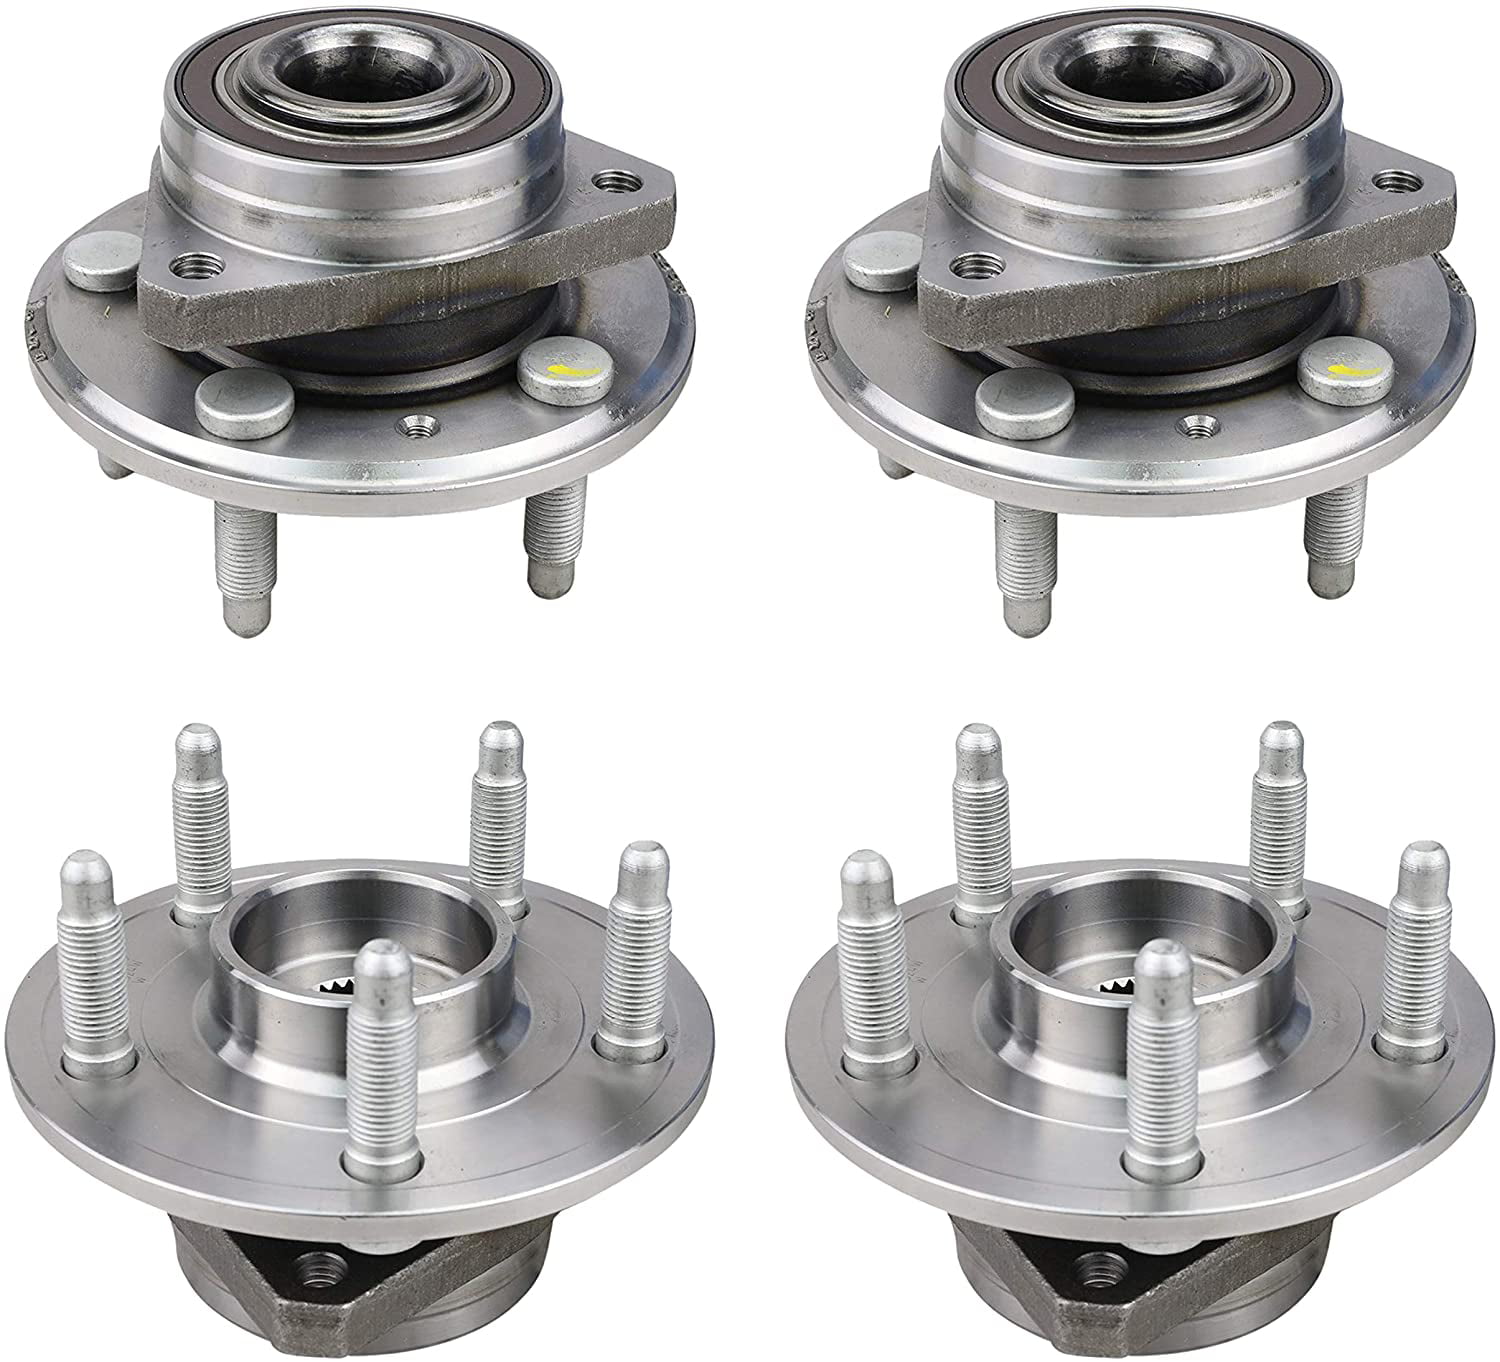 Front Rear Wheel Bearing Hub for 2014-2017 Chevy IMPALA 2011-2016 Buick Lacrosse